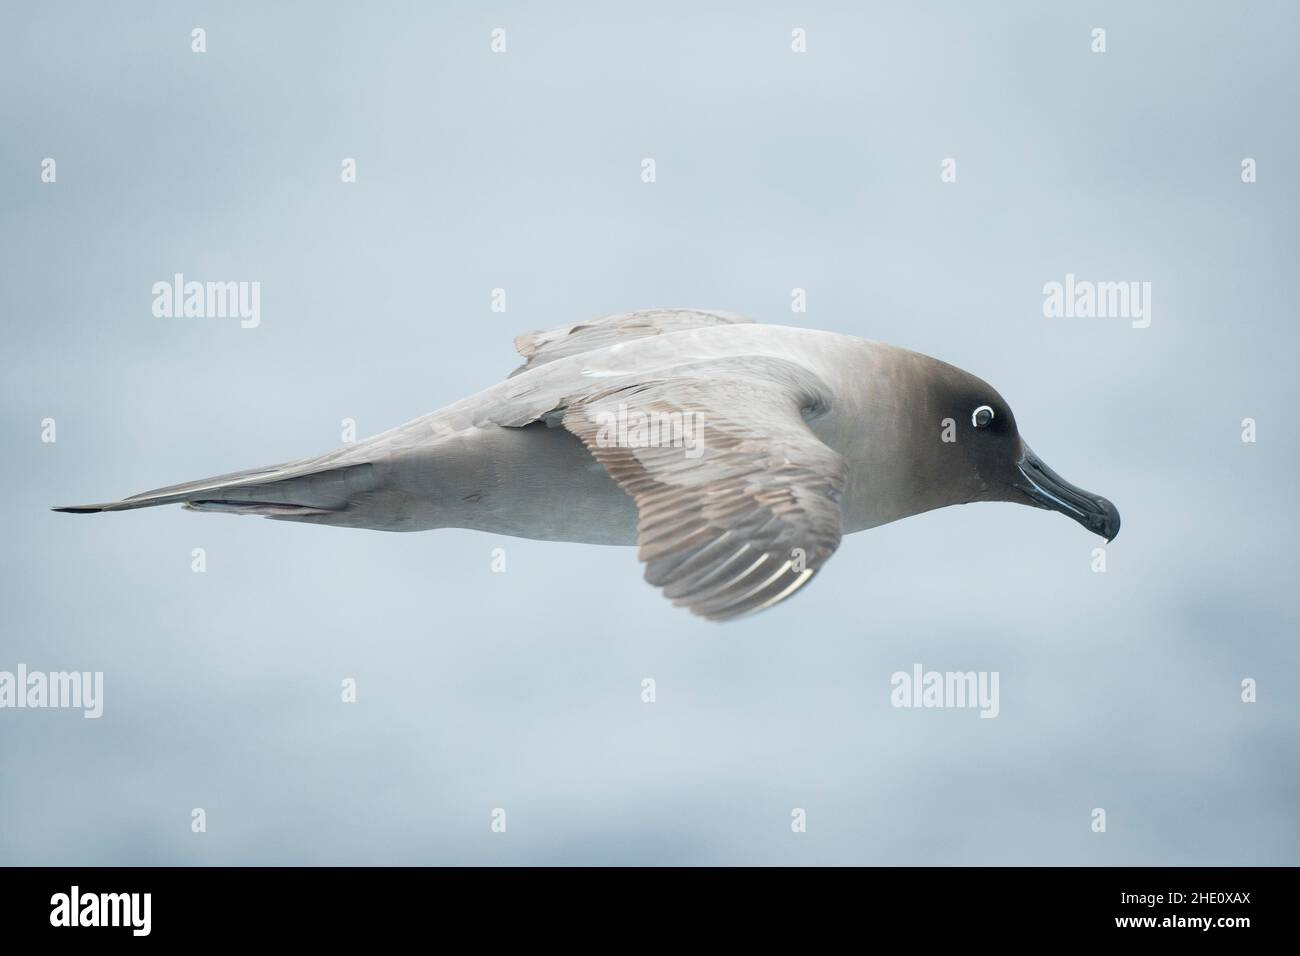 A Light-mantled sooty albatross flies over the Southern ocean in the Drake Passage. Stock Photo